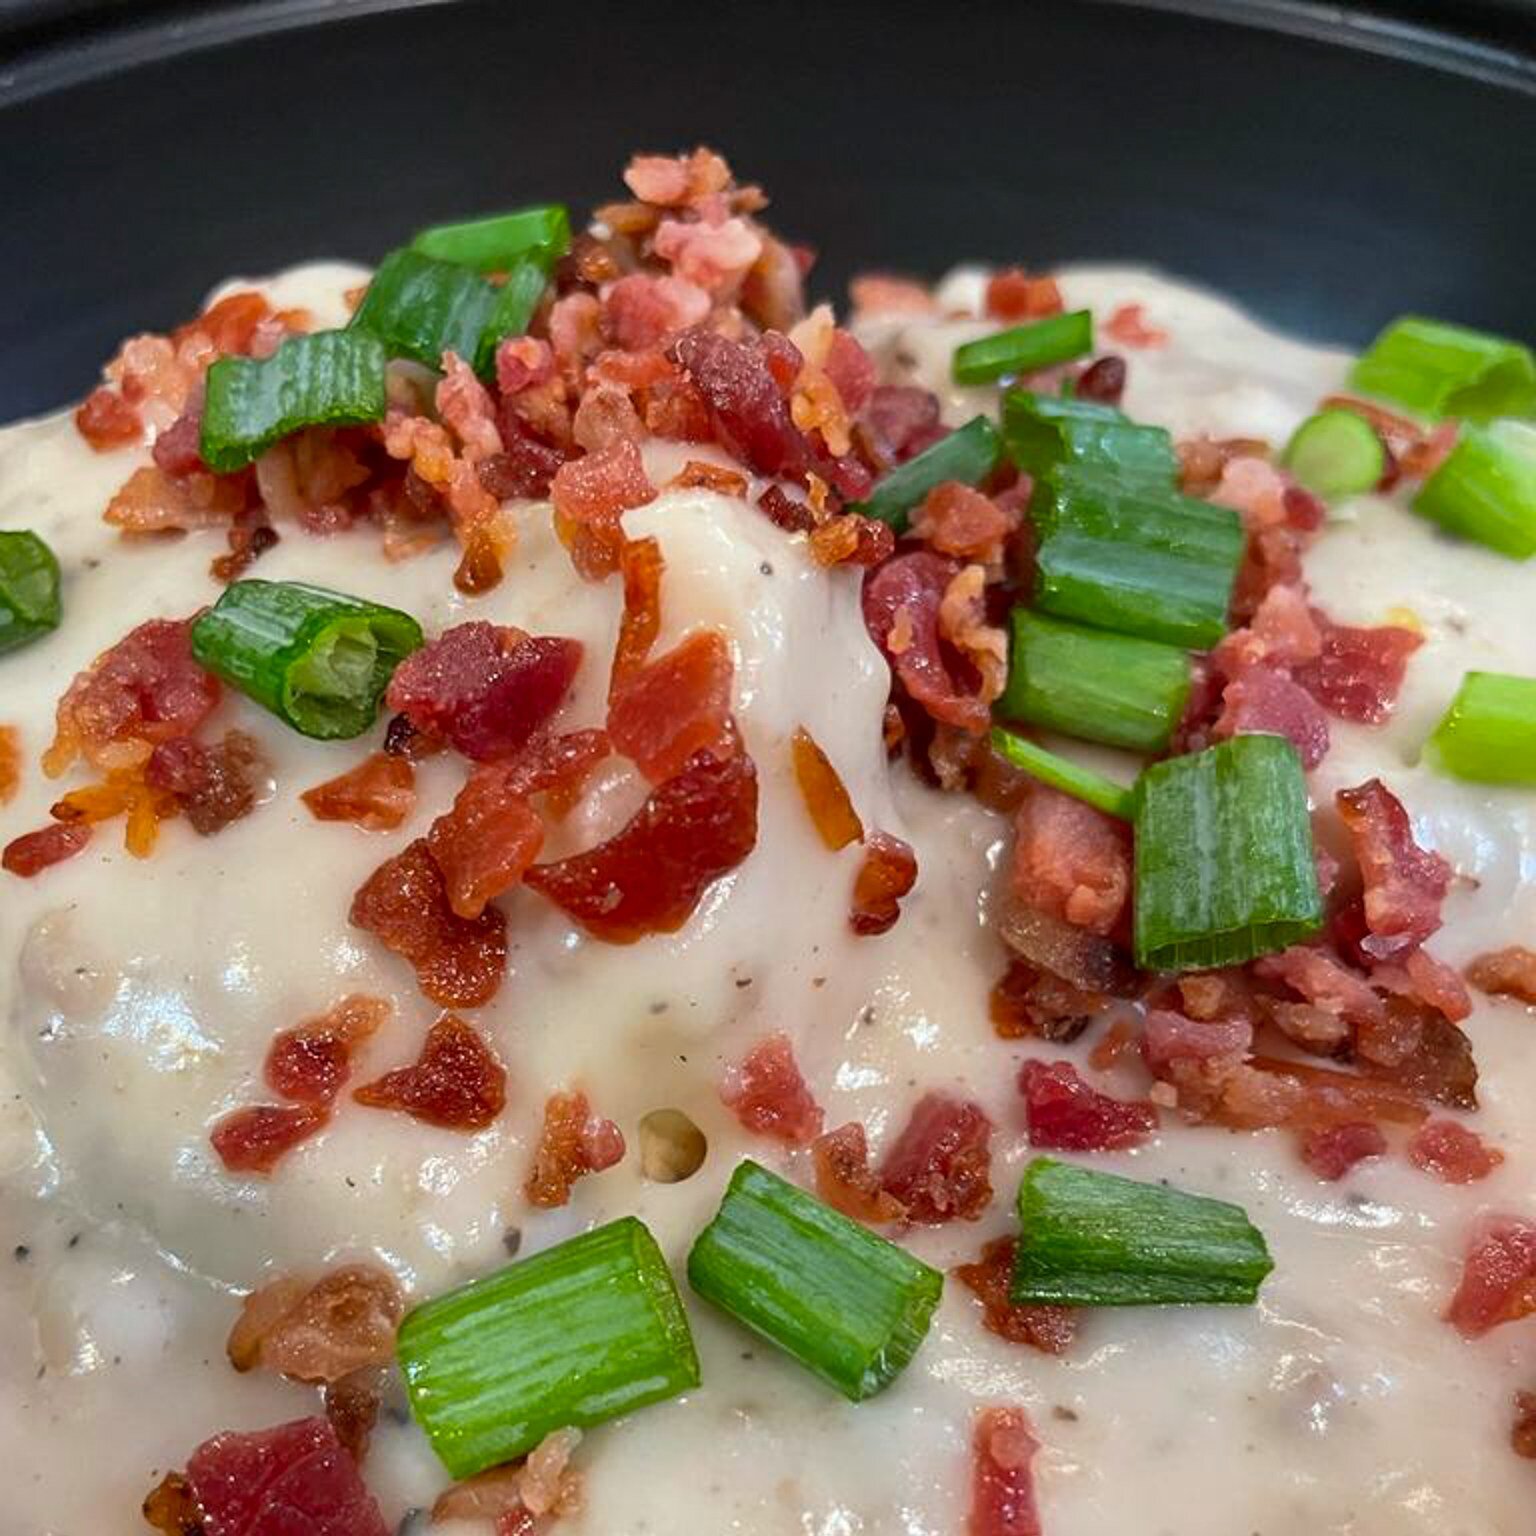 Who needs a comforting breakfast?
Our Biscuits &amp; Gravy will do the trick! 
We serve our BREAKFAST ALL DAY! 👏 #YESPLEASE 
Come try ours TODAY! 

The kitchen is OPEN till 4! 
We are open on Saturdays till 2Pm! 
Grab a table! We look forward to see